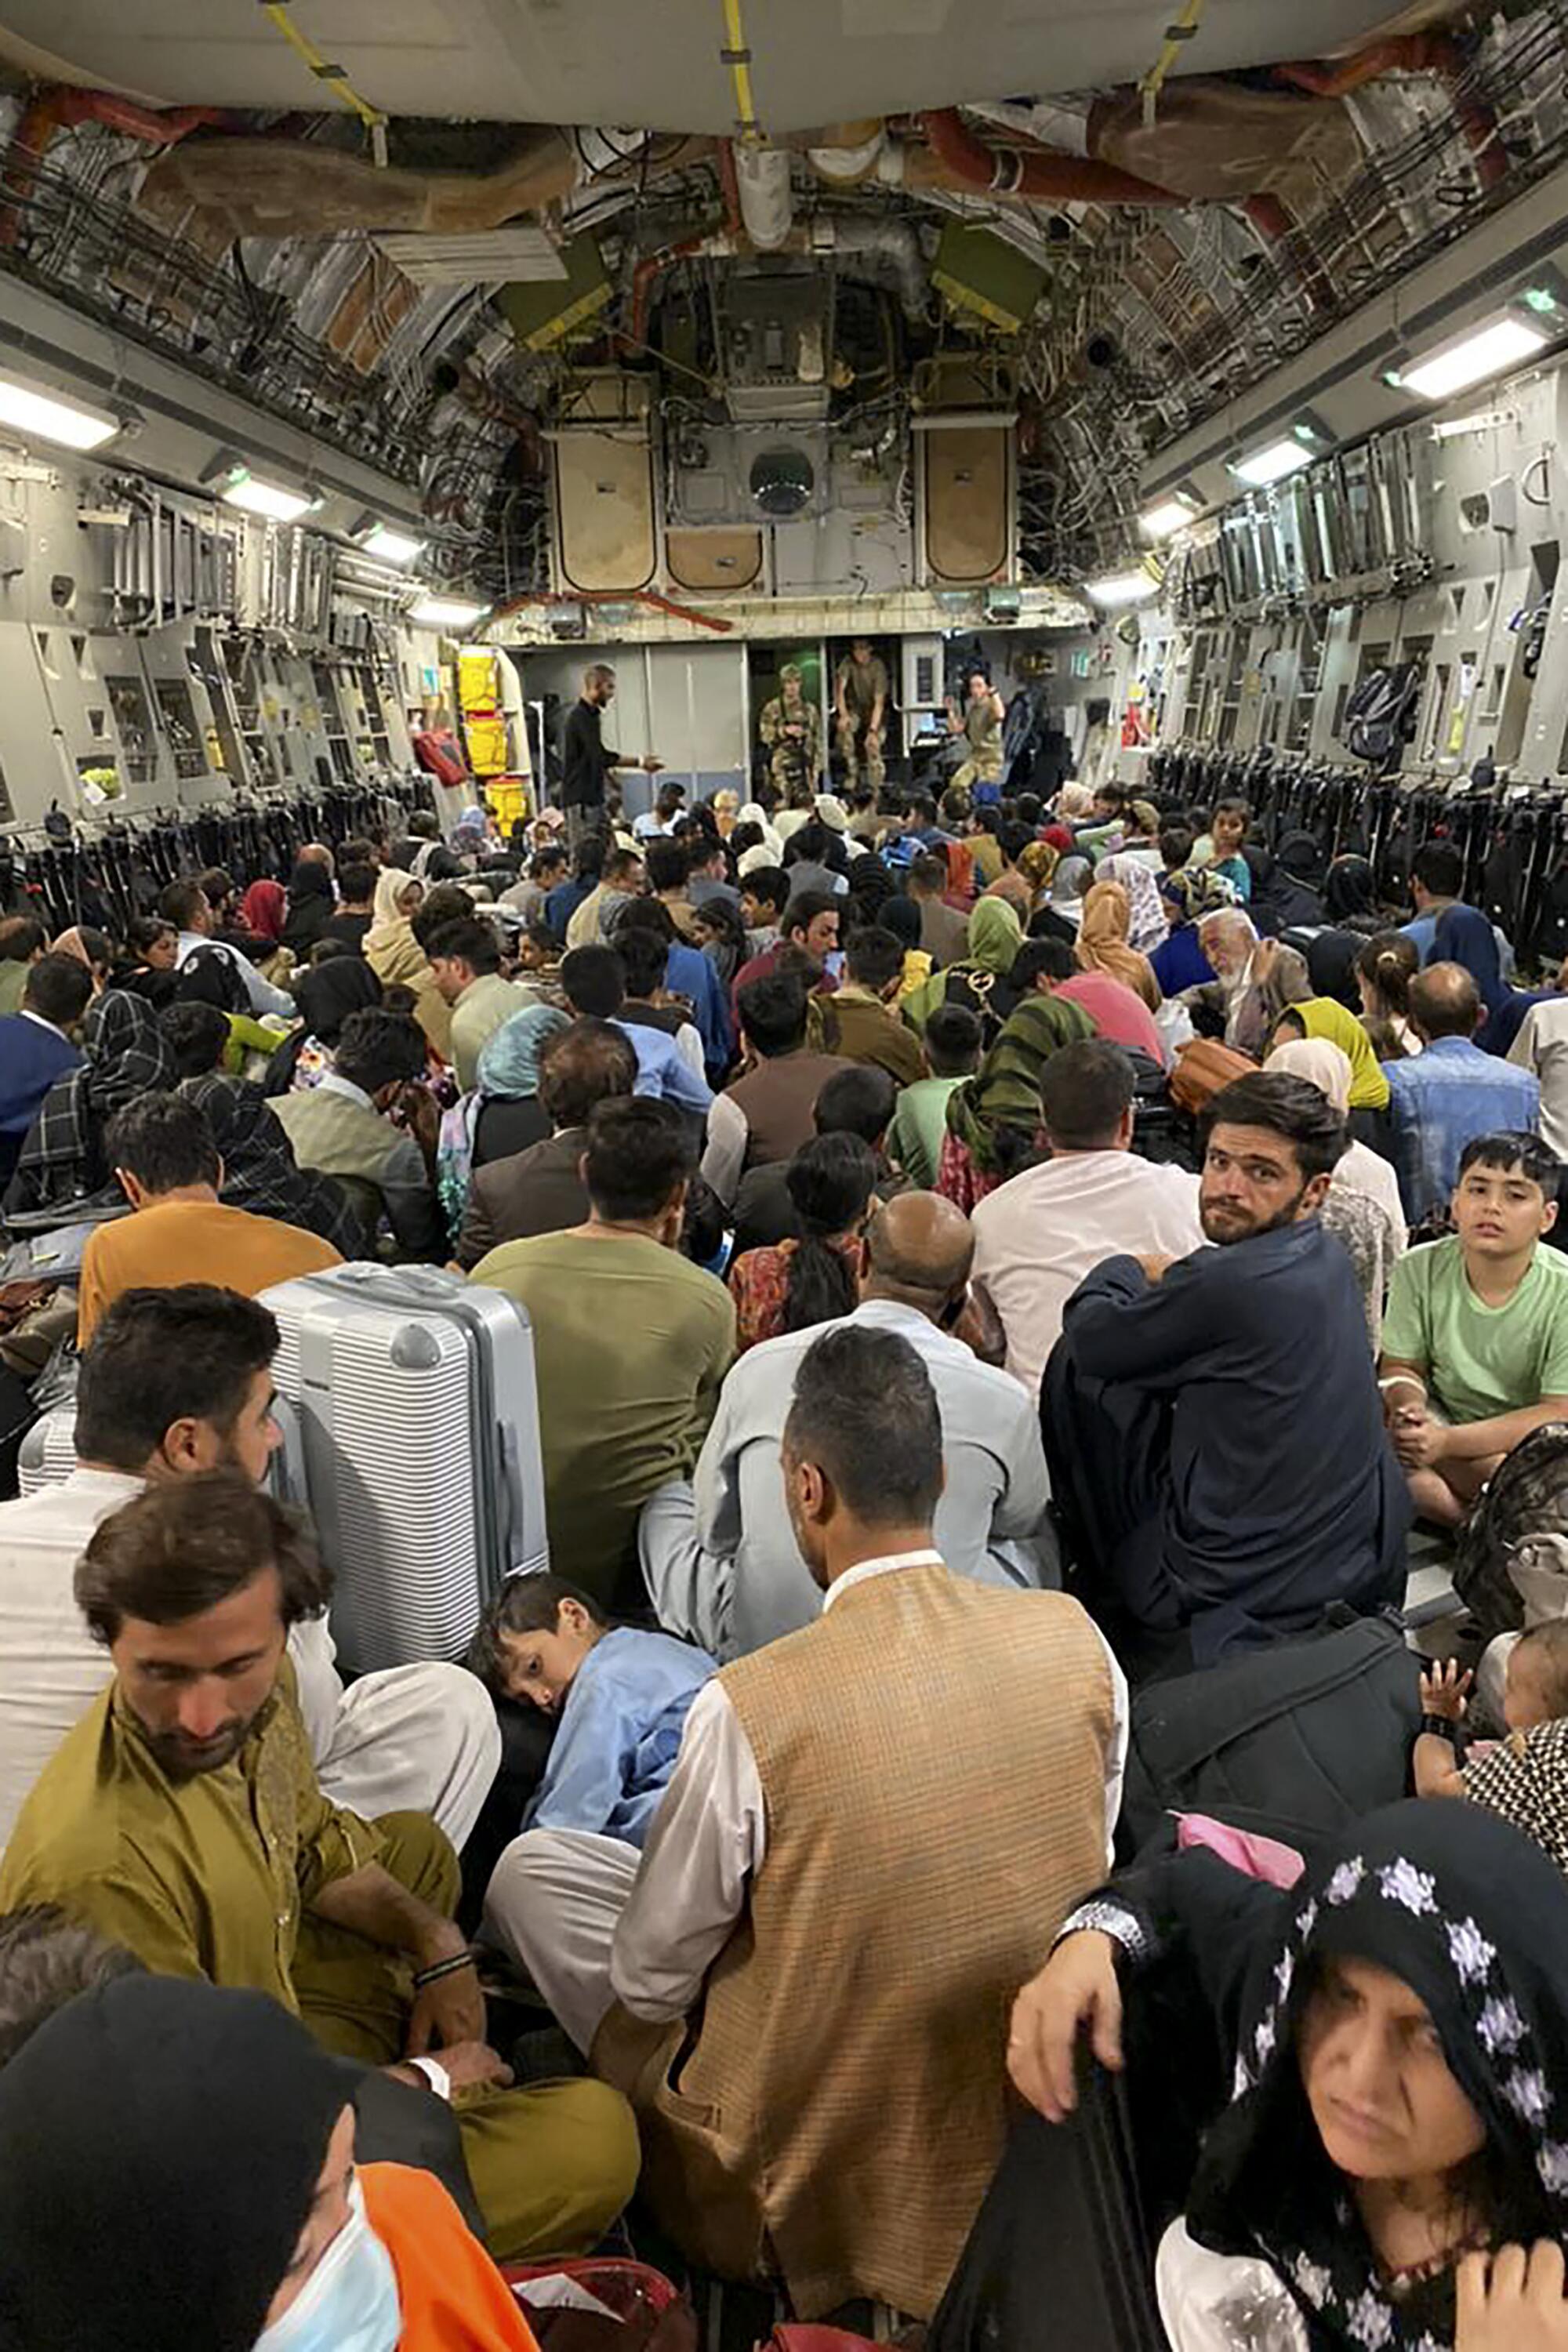 Afghan people sit inside a U.S. military aircraft to leave Afghanistan, at the military airport in Kabul.